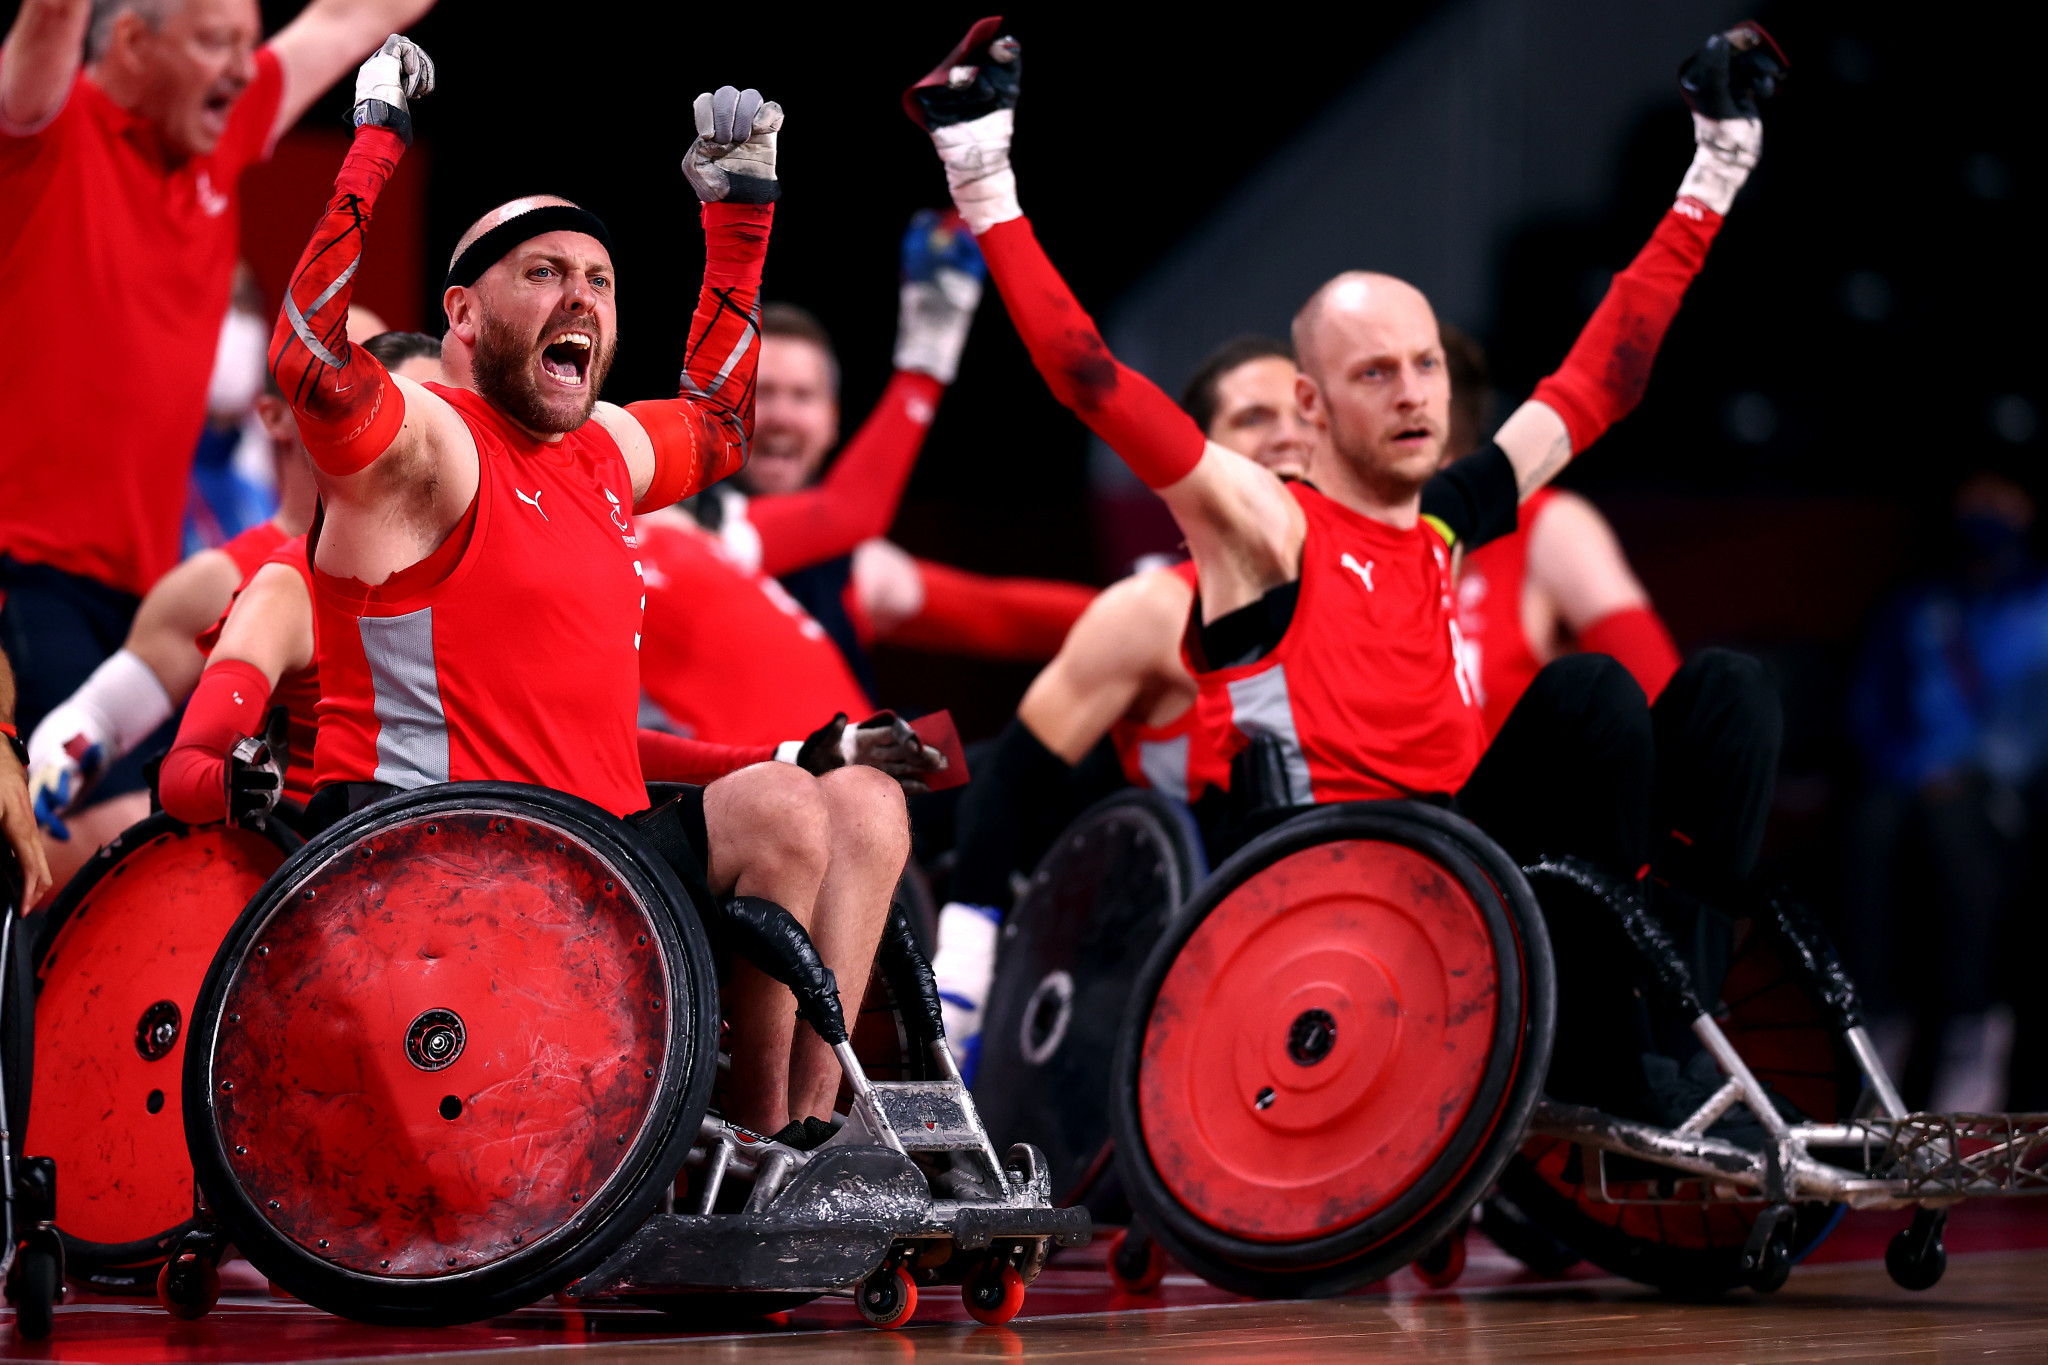 Debutants Denmark stunned reigning champions Australia as wheelchair rugby competition began ©Getty Images